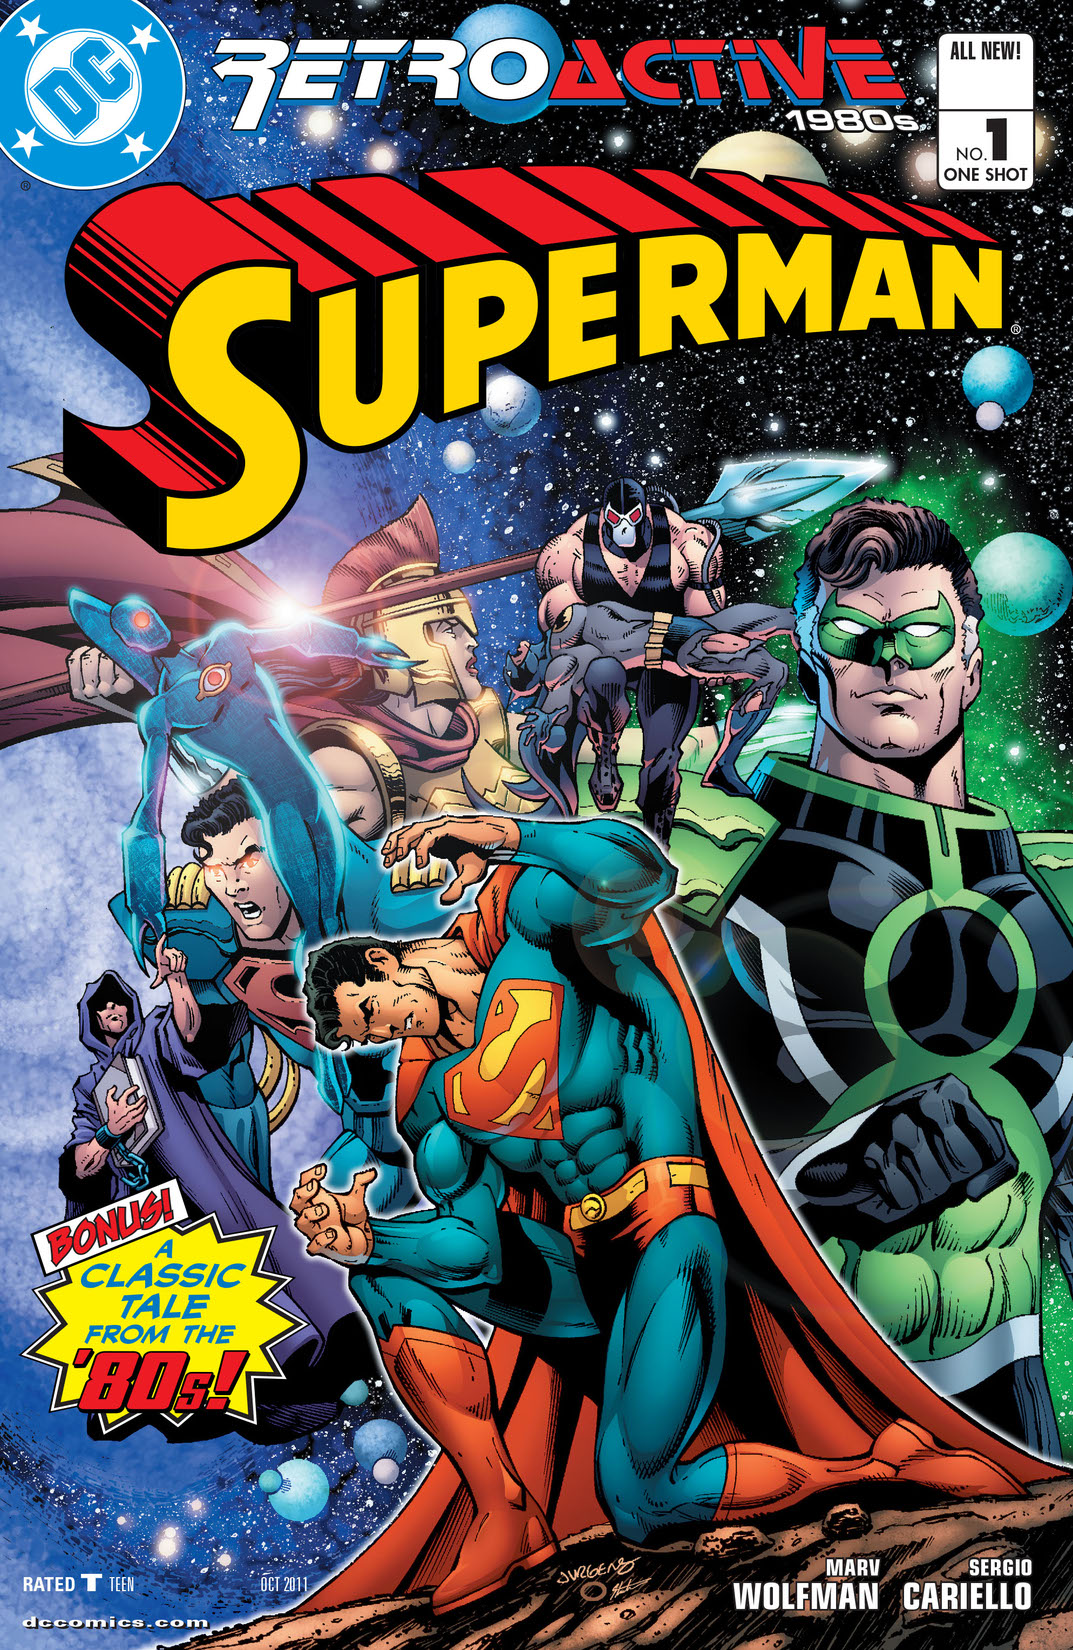 DC Retroactive: Superman - The '80s #1 preview images